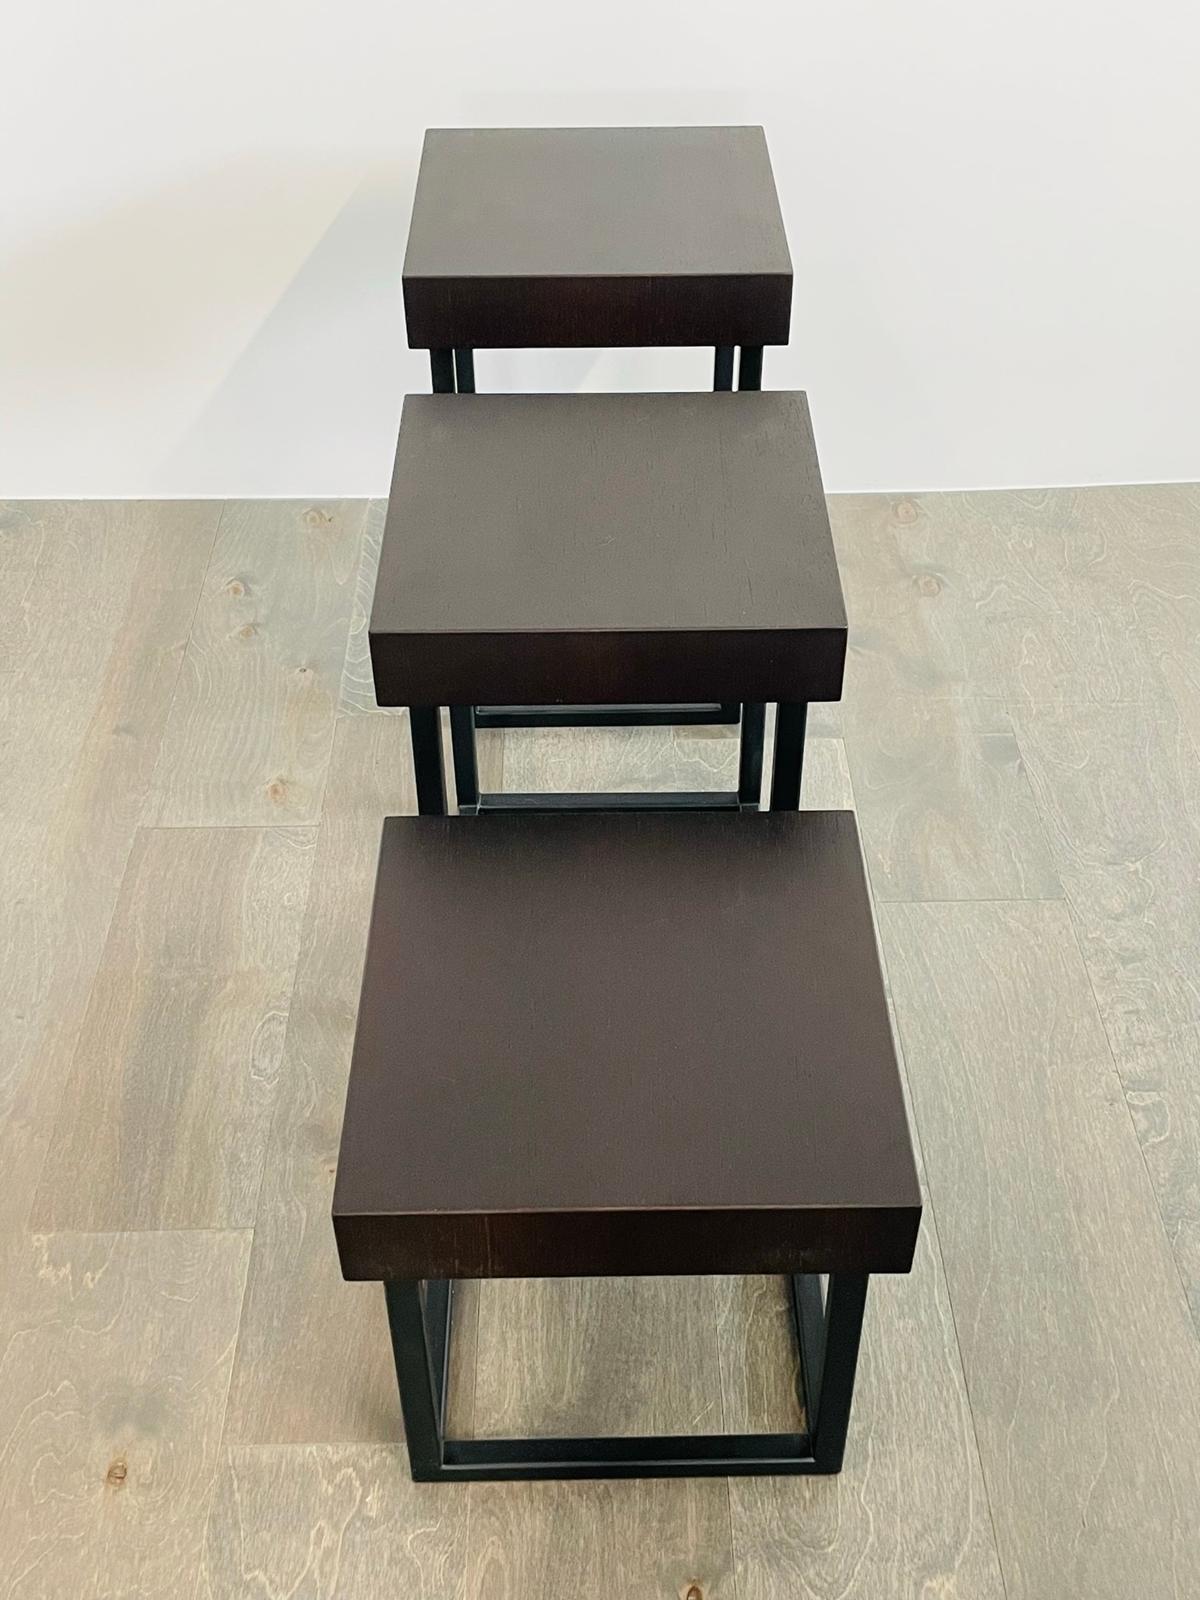 Design: Cain Modern Studio
Design Year: 2023
Country of Provenance: USA

Introducing the stunning 3 Iron & Oak Side Tables, proudly made in the USA by Cain Studio. Handcrafted with meticulous attention to detail, these tables are designed to add